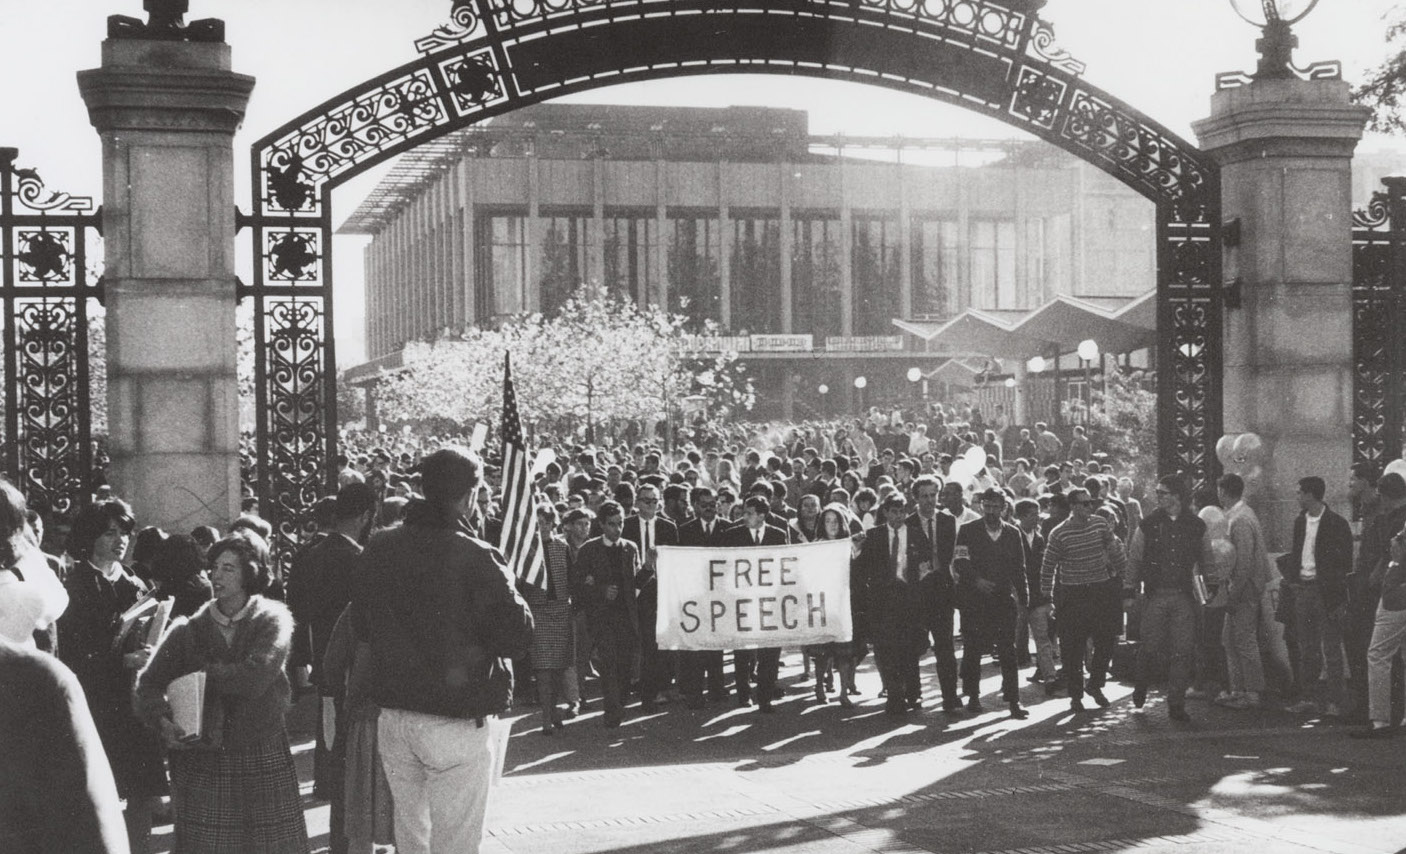 UCB Free Speech Movement protesters at Sather Gate on Nov. 20, 1964. (Credit: UCB Library)